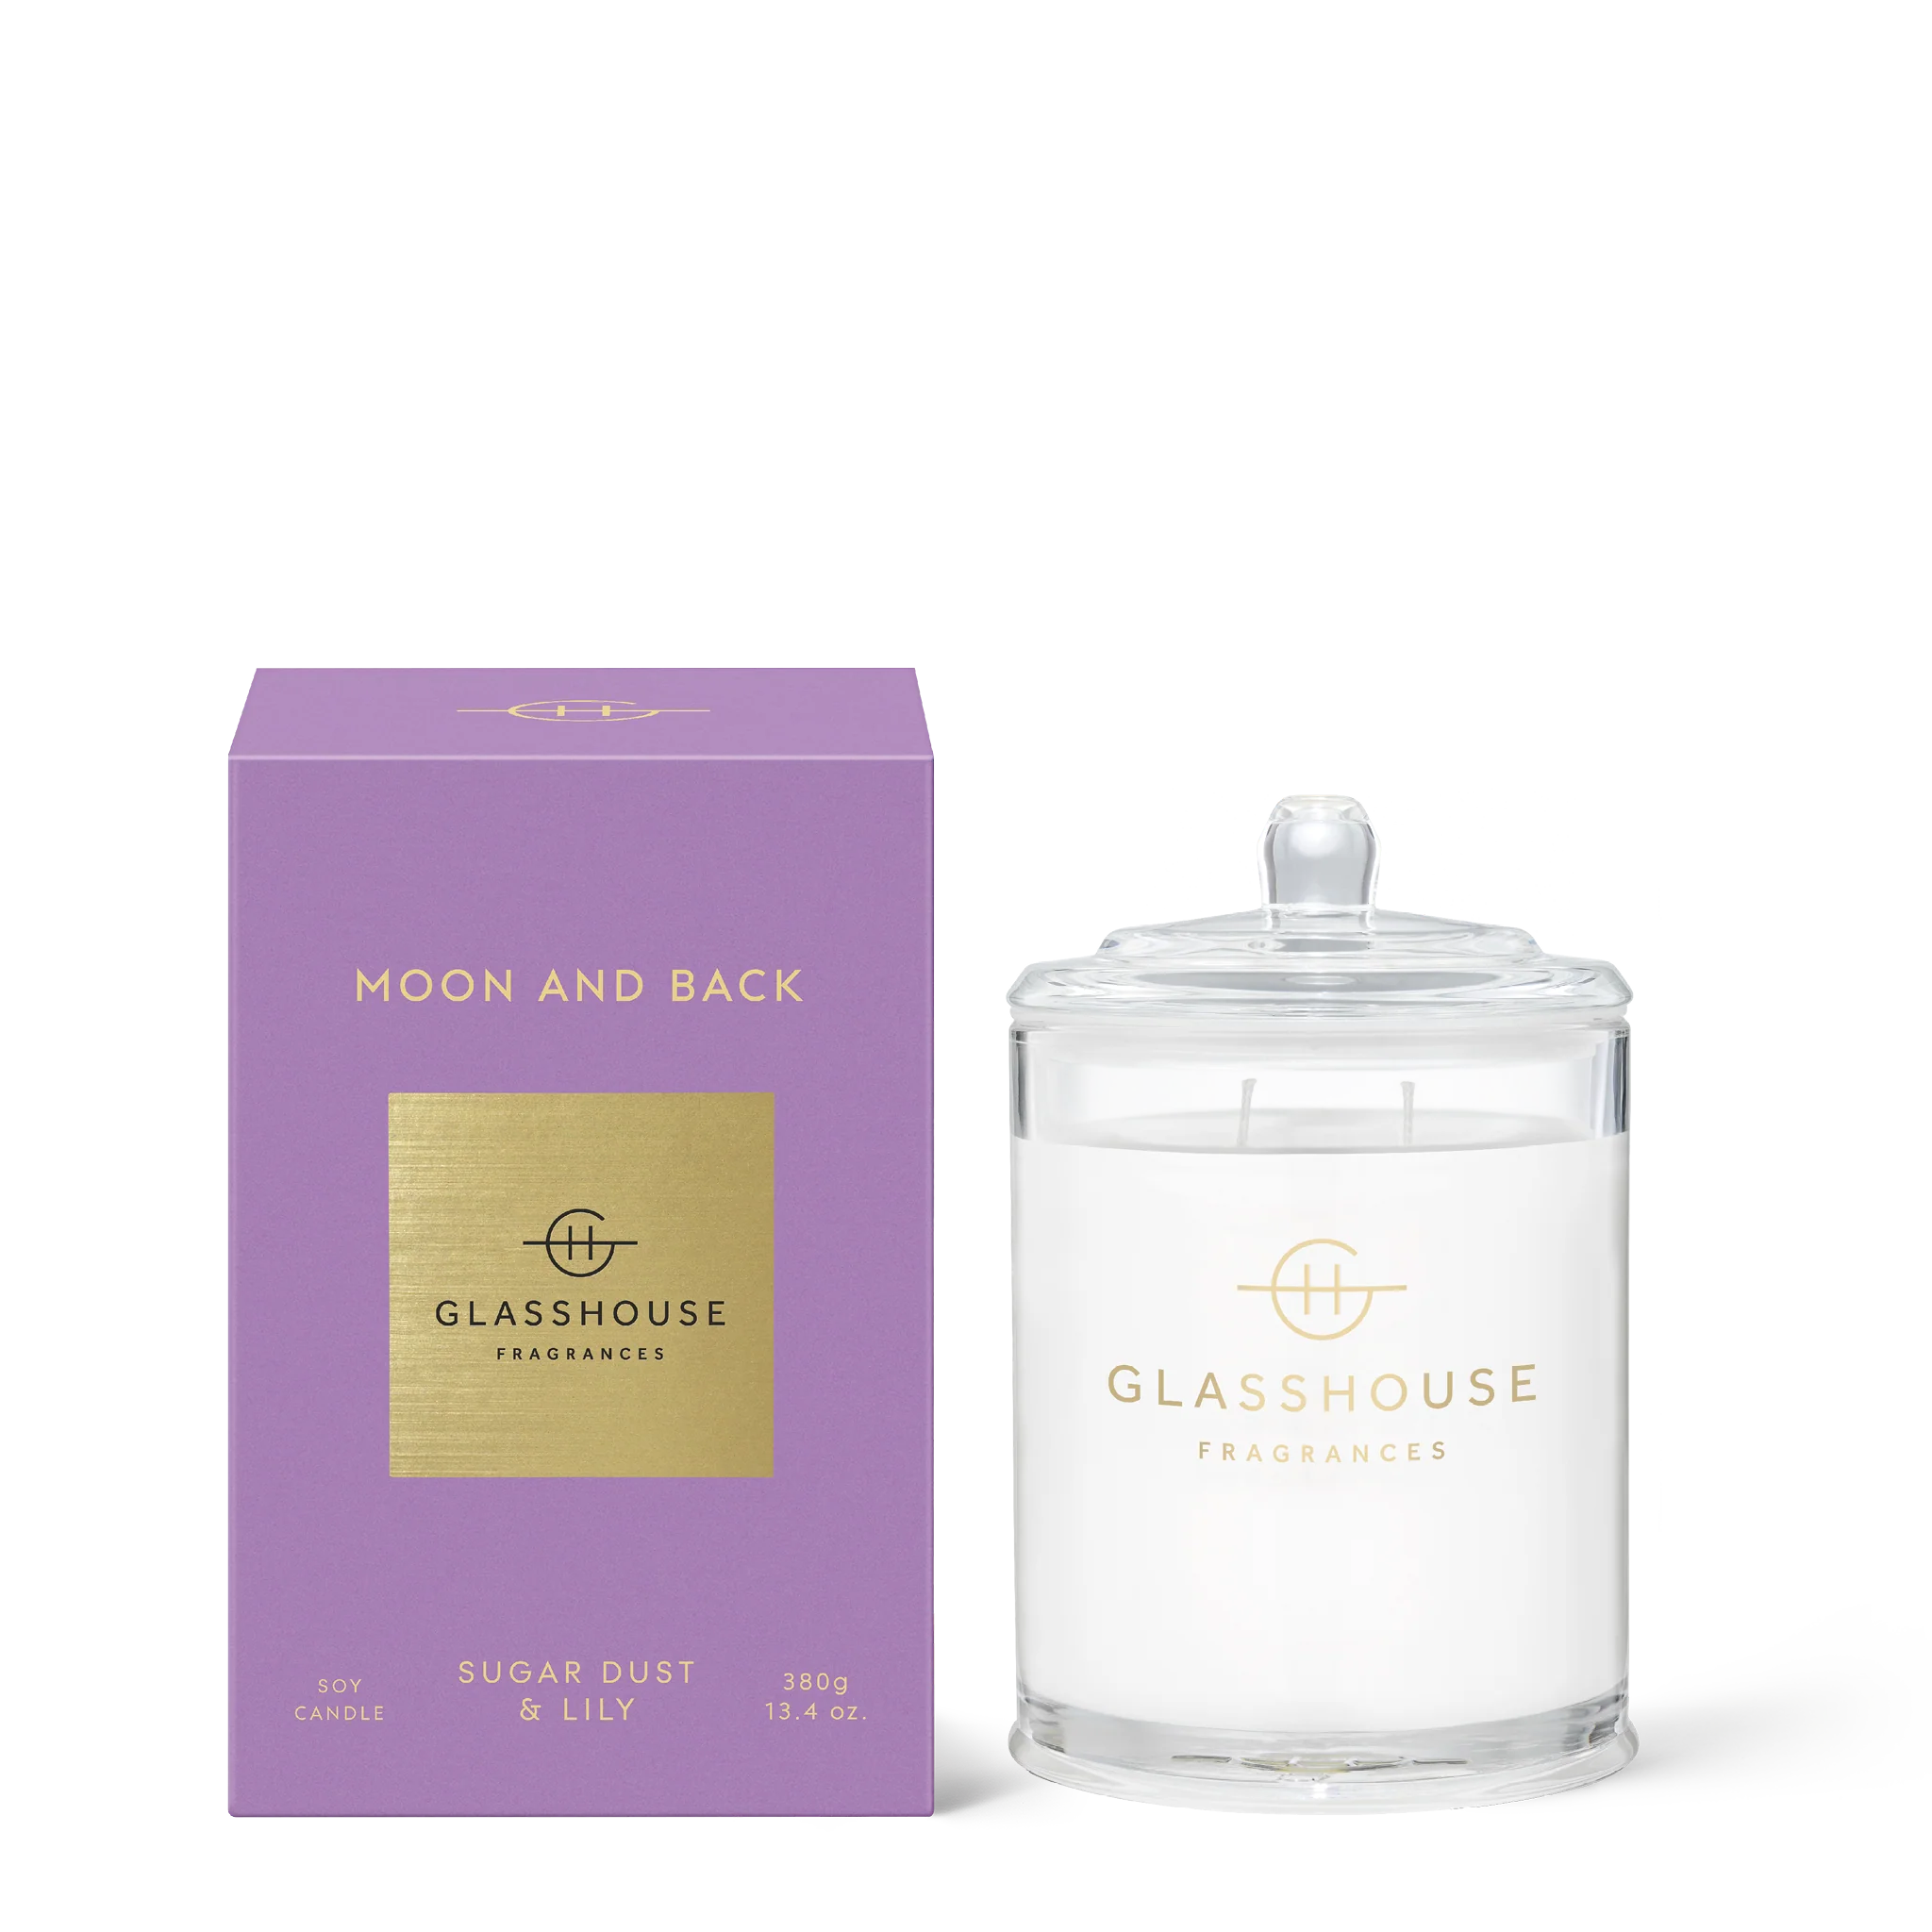 View Glasshouse Fragrances - Moon & Back Triple Scented Candle